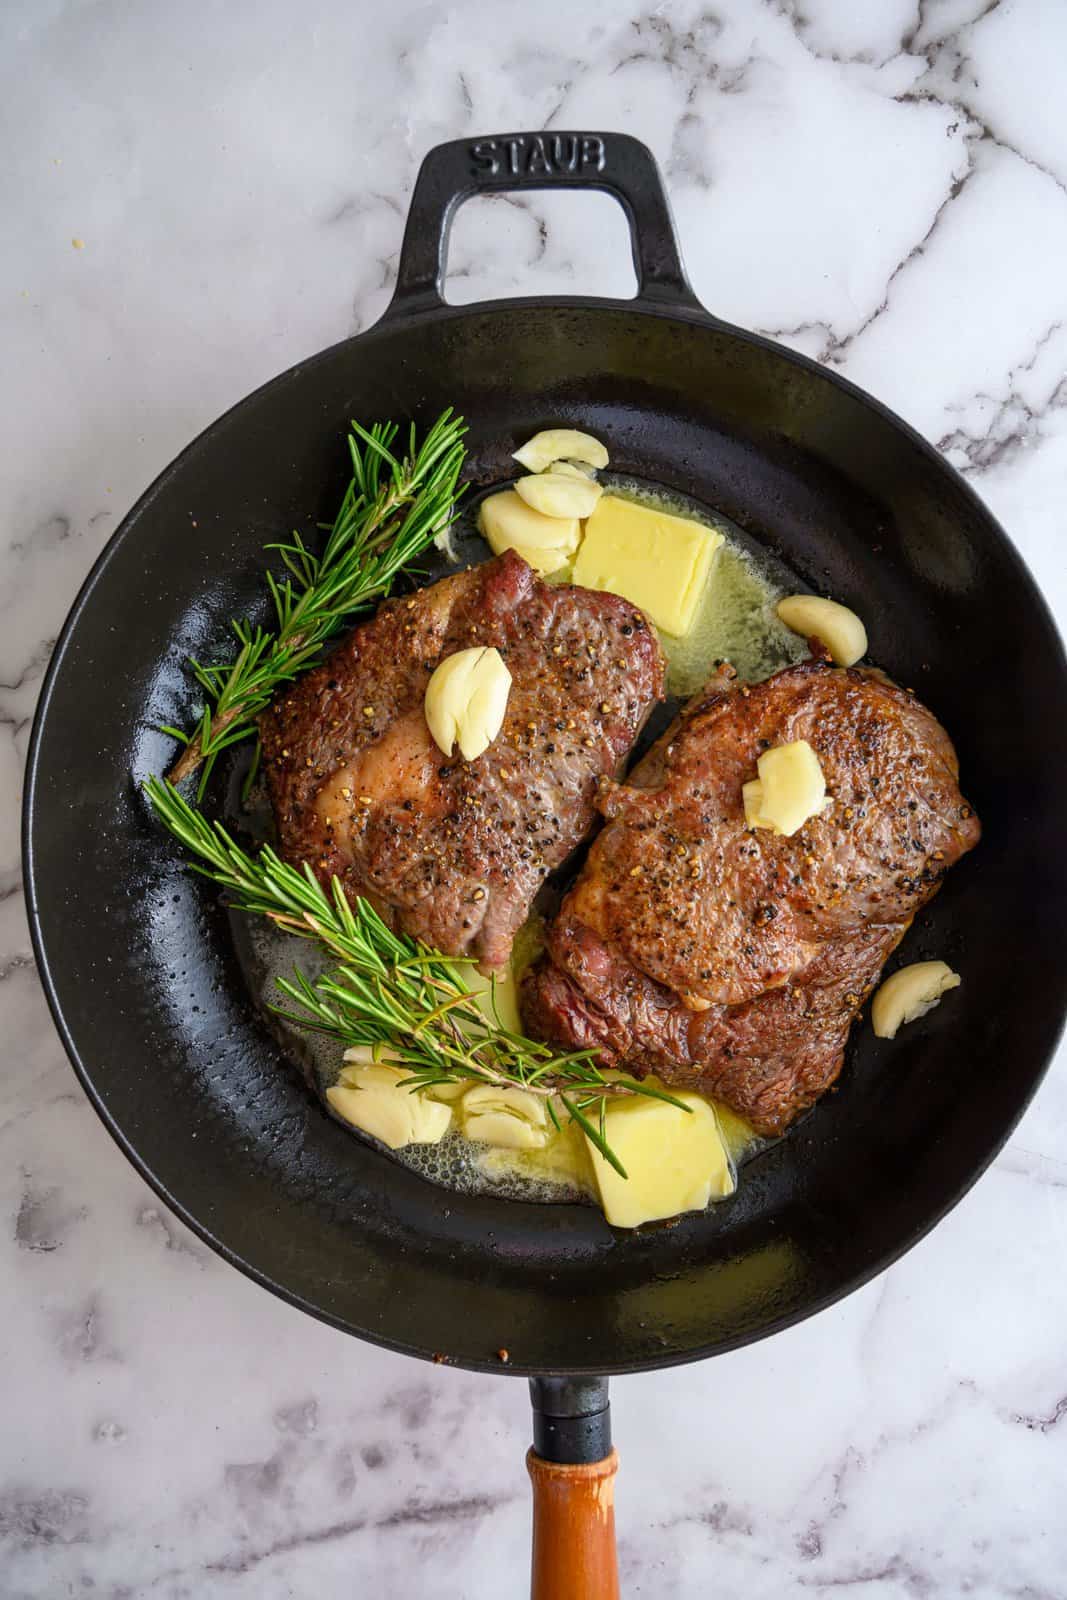 Steaks in pan with butter, garlic and rosemary sprigs.